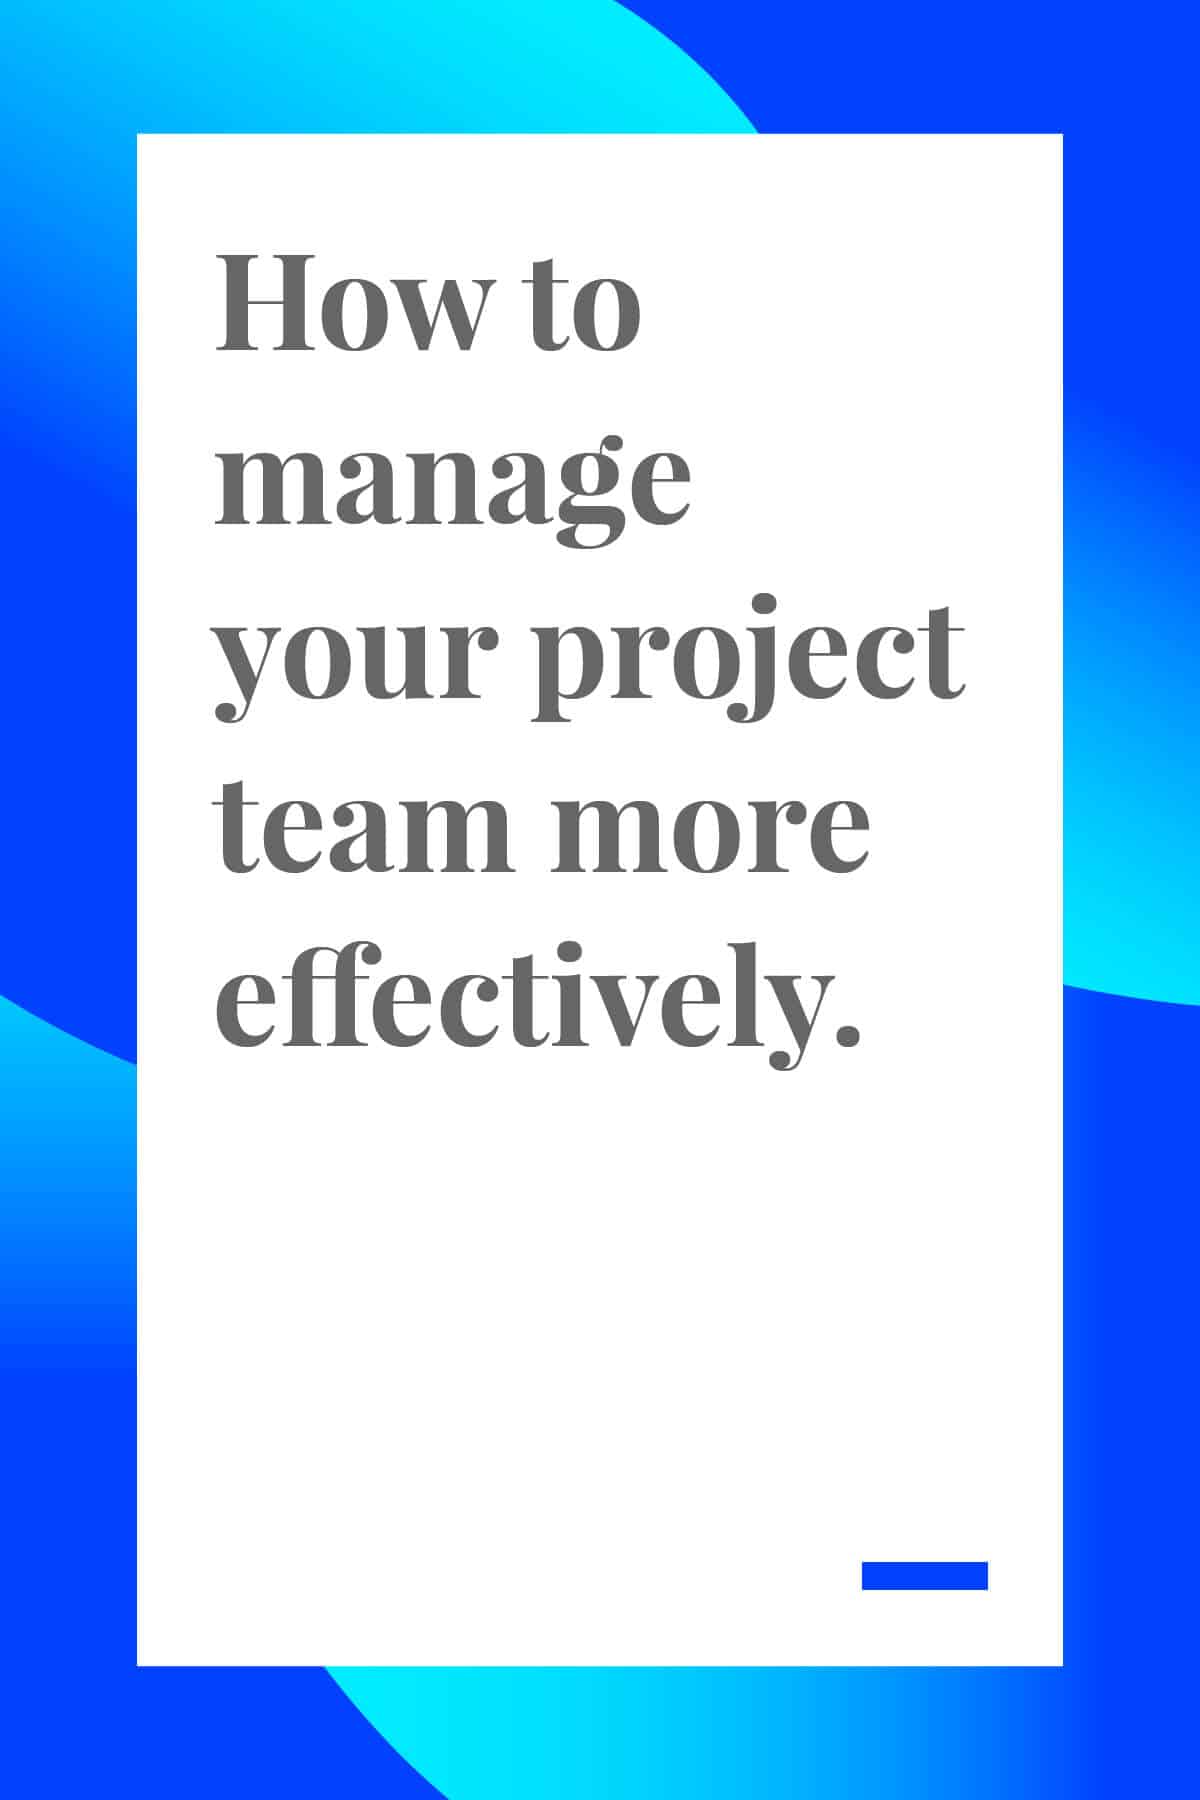 These three management hacks will help you manage your project team more effectively so you can finish your project on time and on budget, every time. #projectmanagement